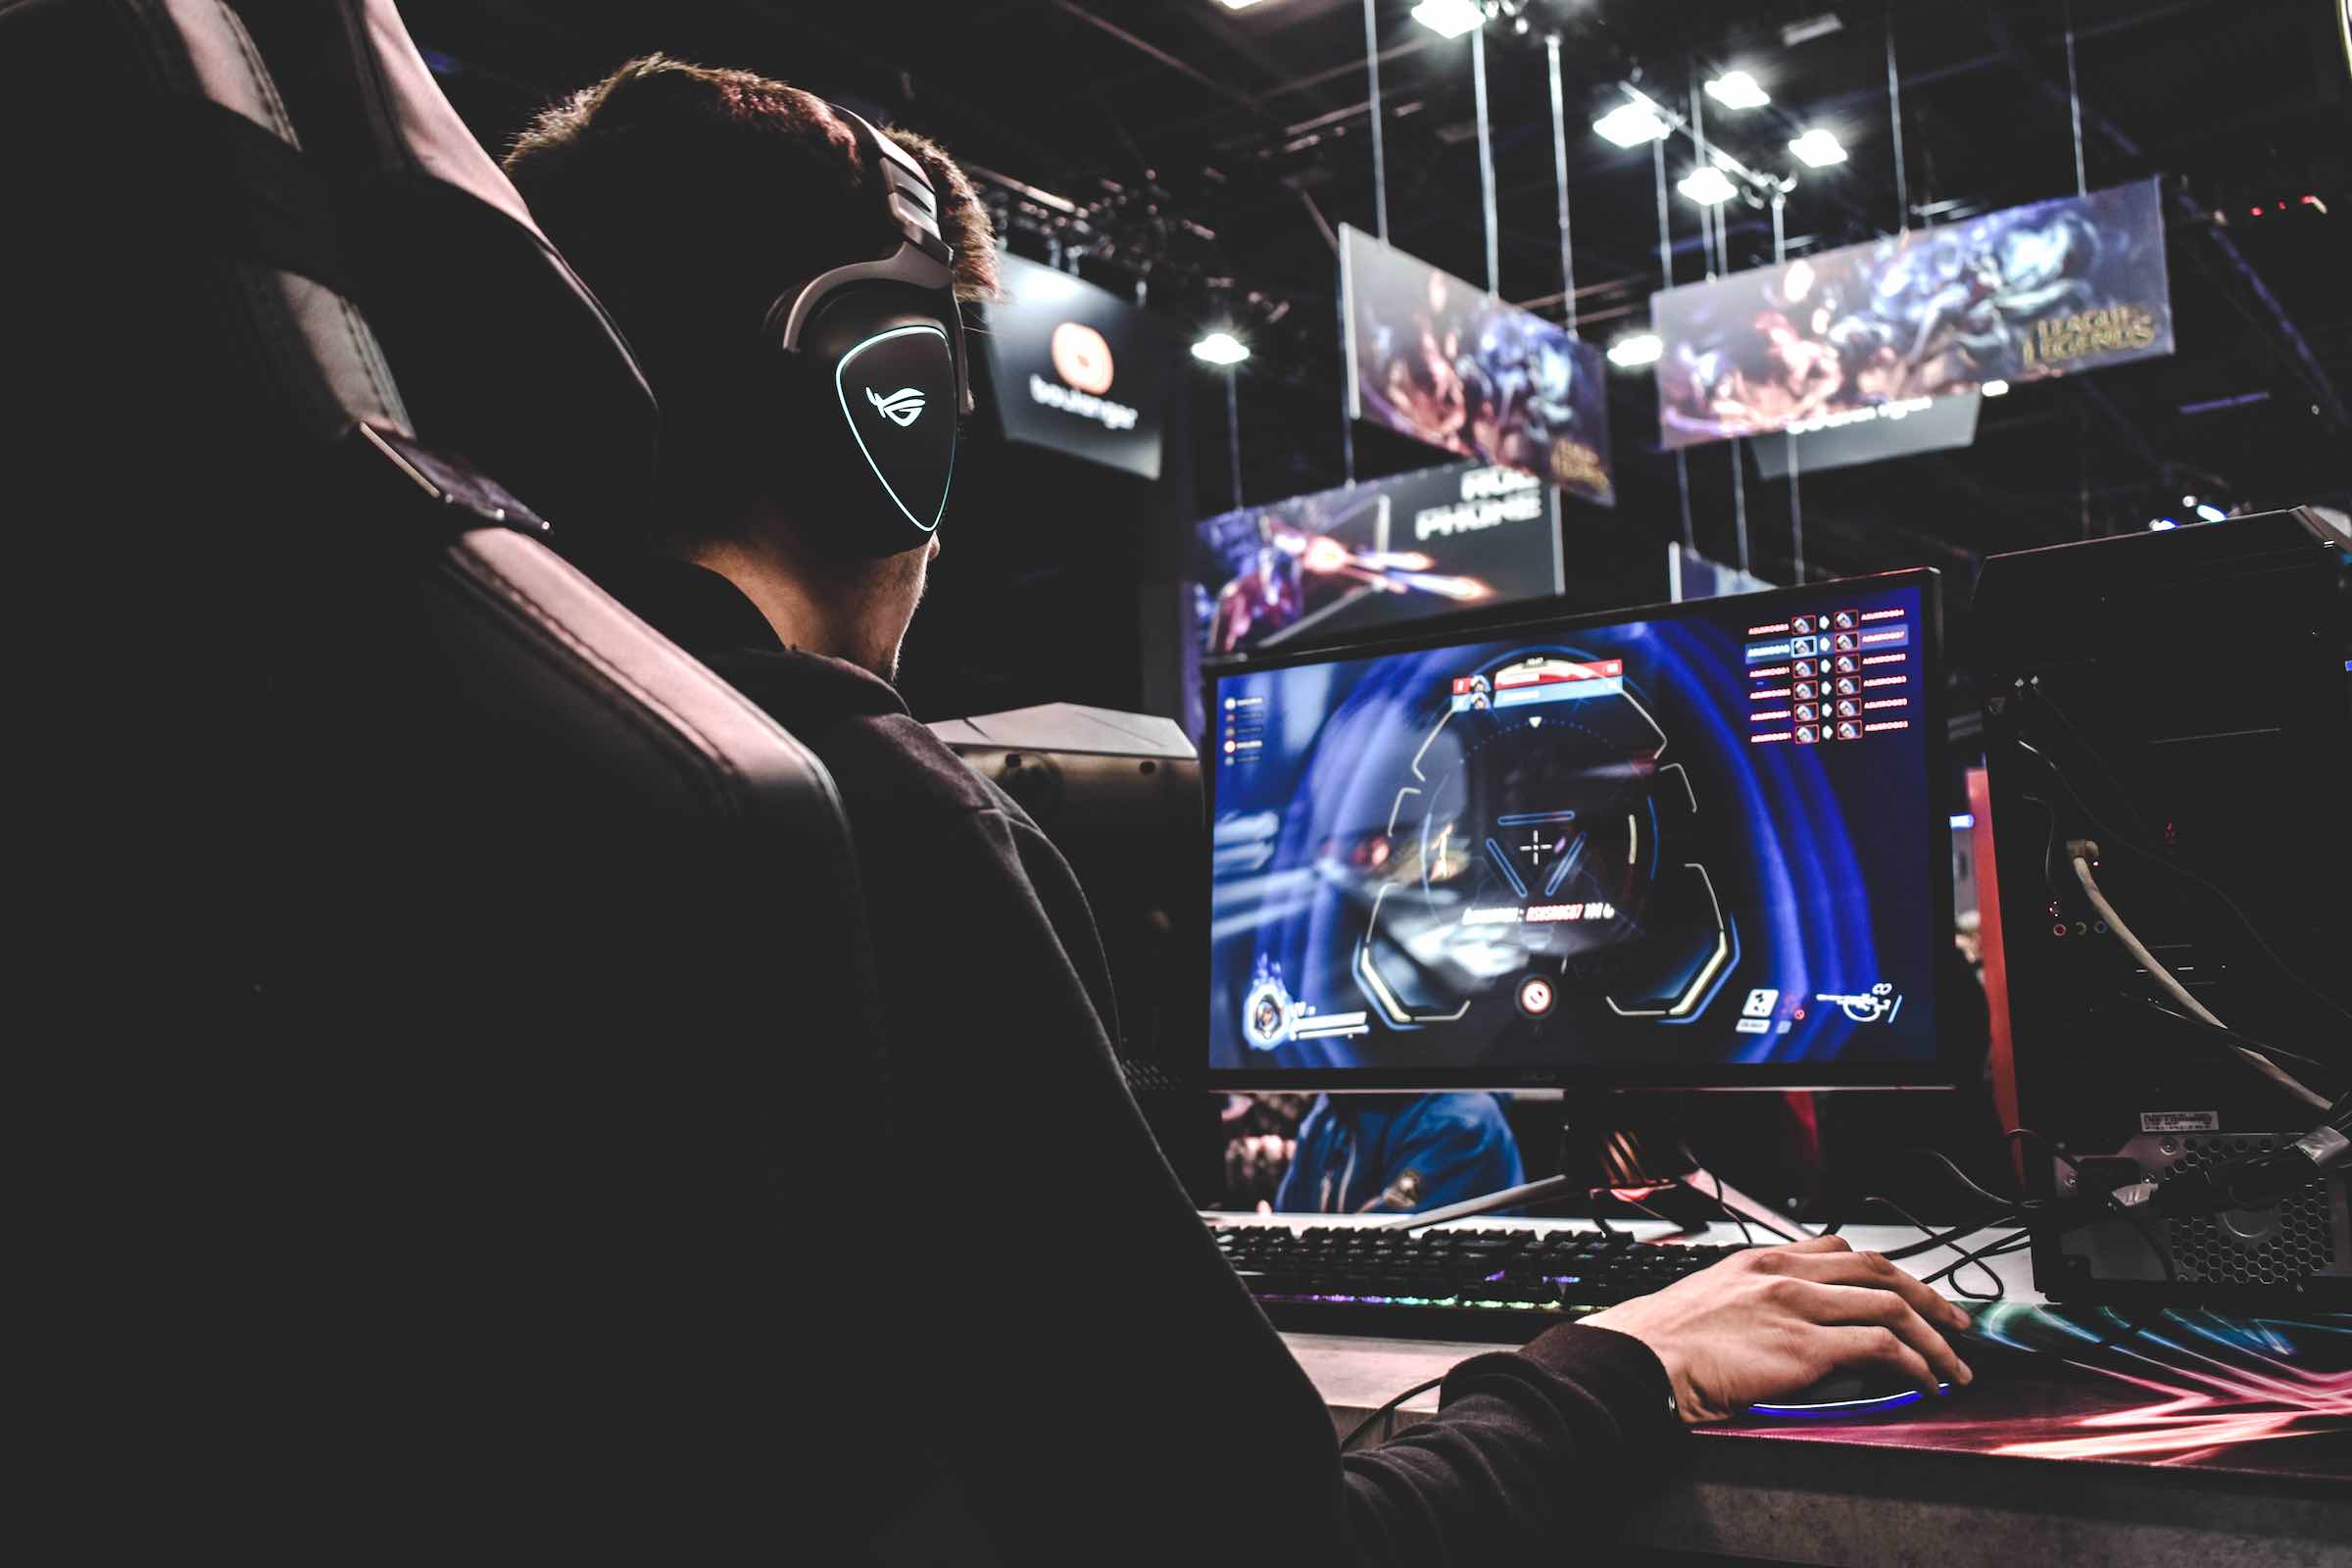 We surveyed online gamers to understand their habits and explore their virtual lives. Check out these surprising insights into the online gaming community.